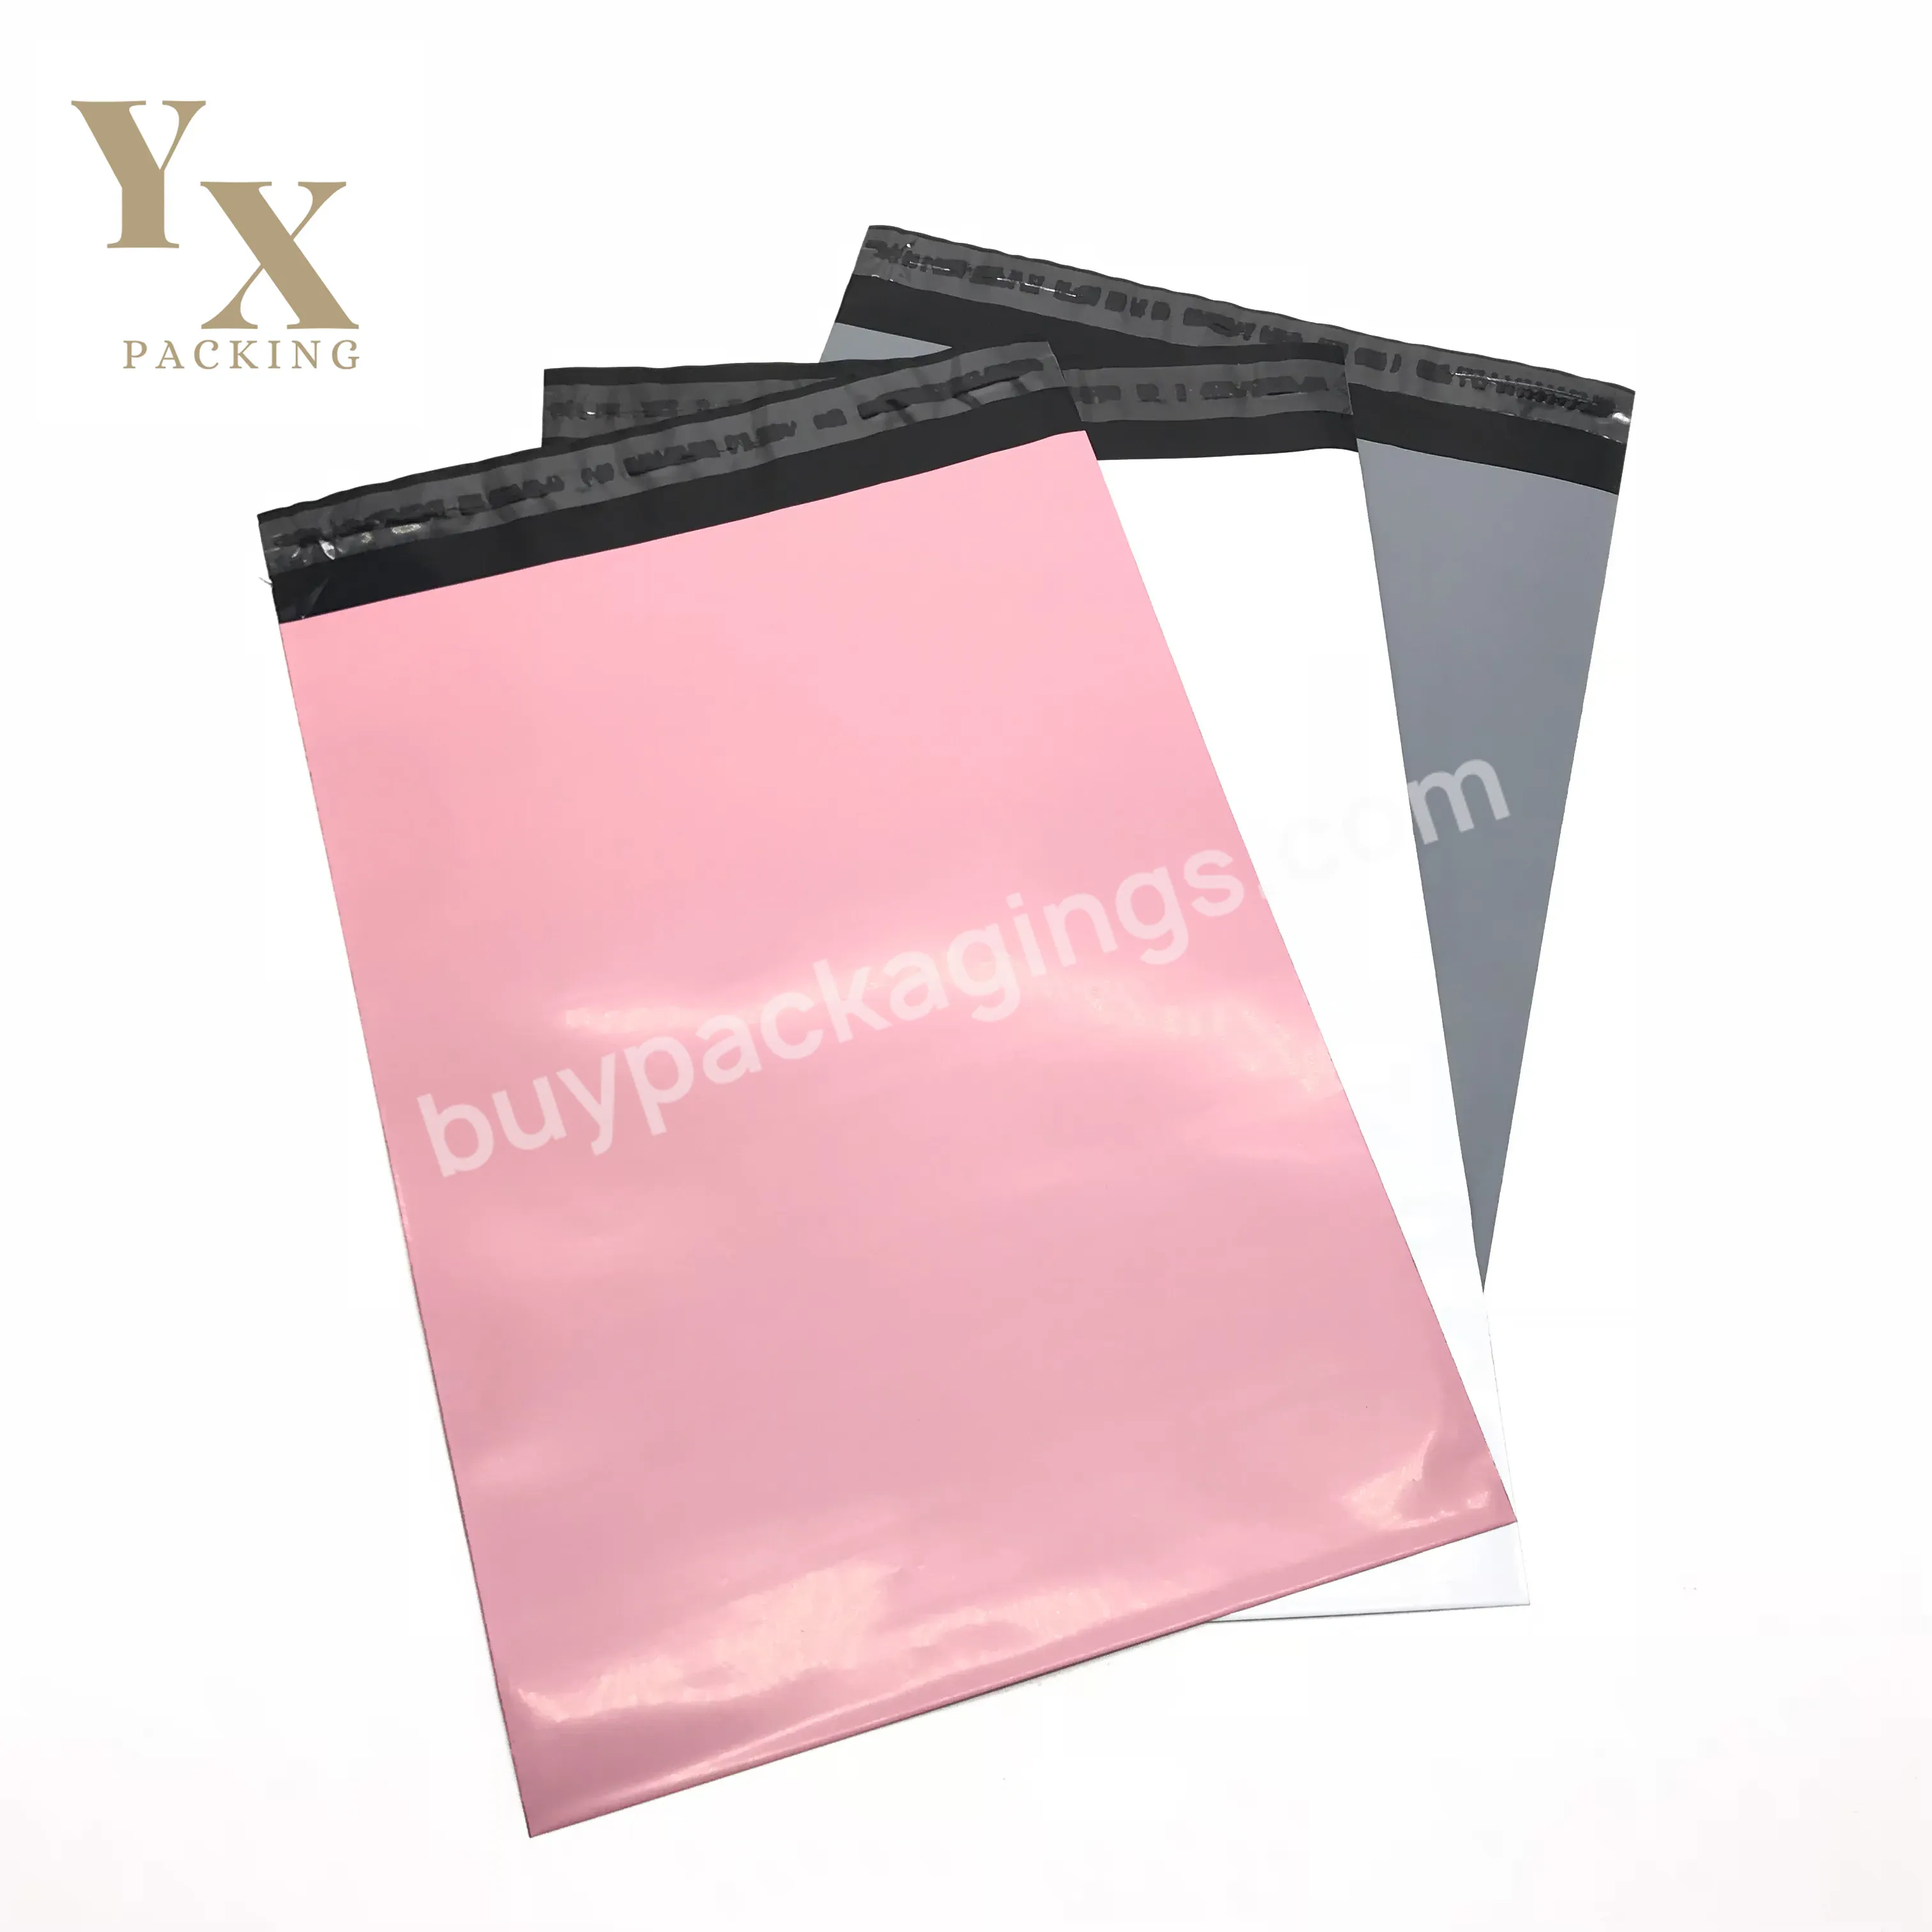 No Smell High Quality Poly Mailer Waterproof Mailing Bags Shipping Bags For Clothing - Buy Shipping Bags For Clothing,Poly Mailer,Mailing Bags.